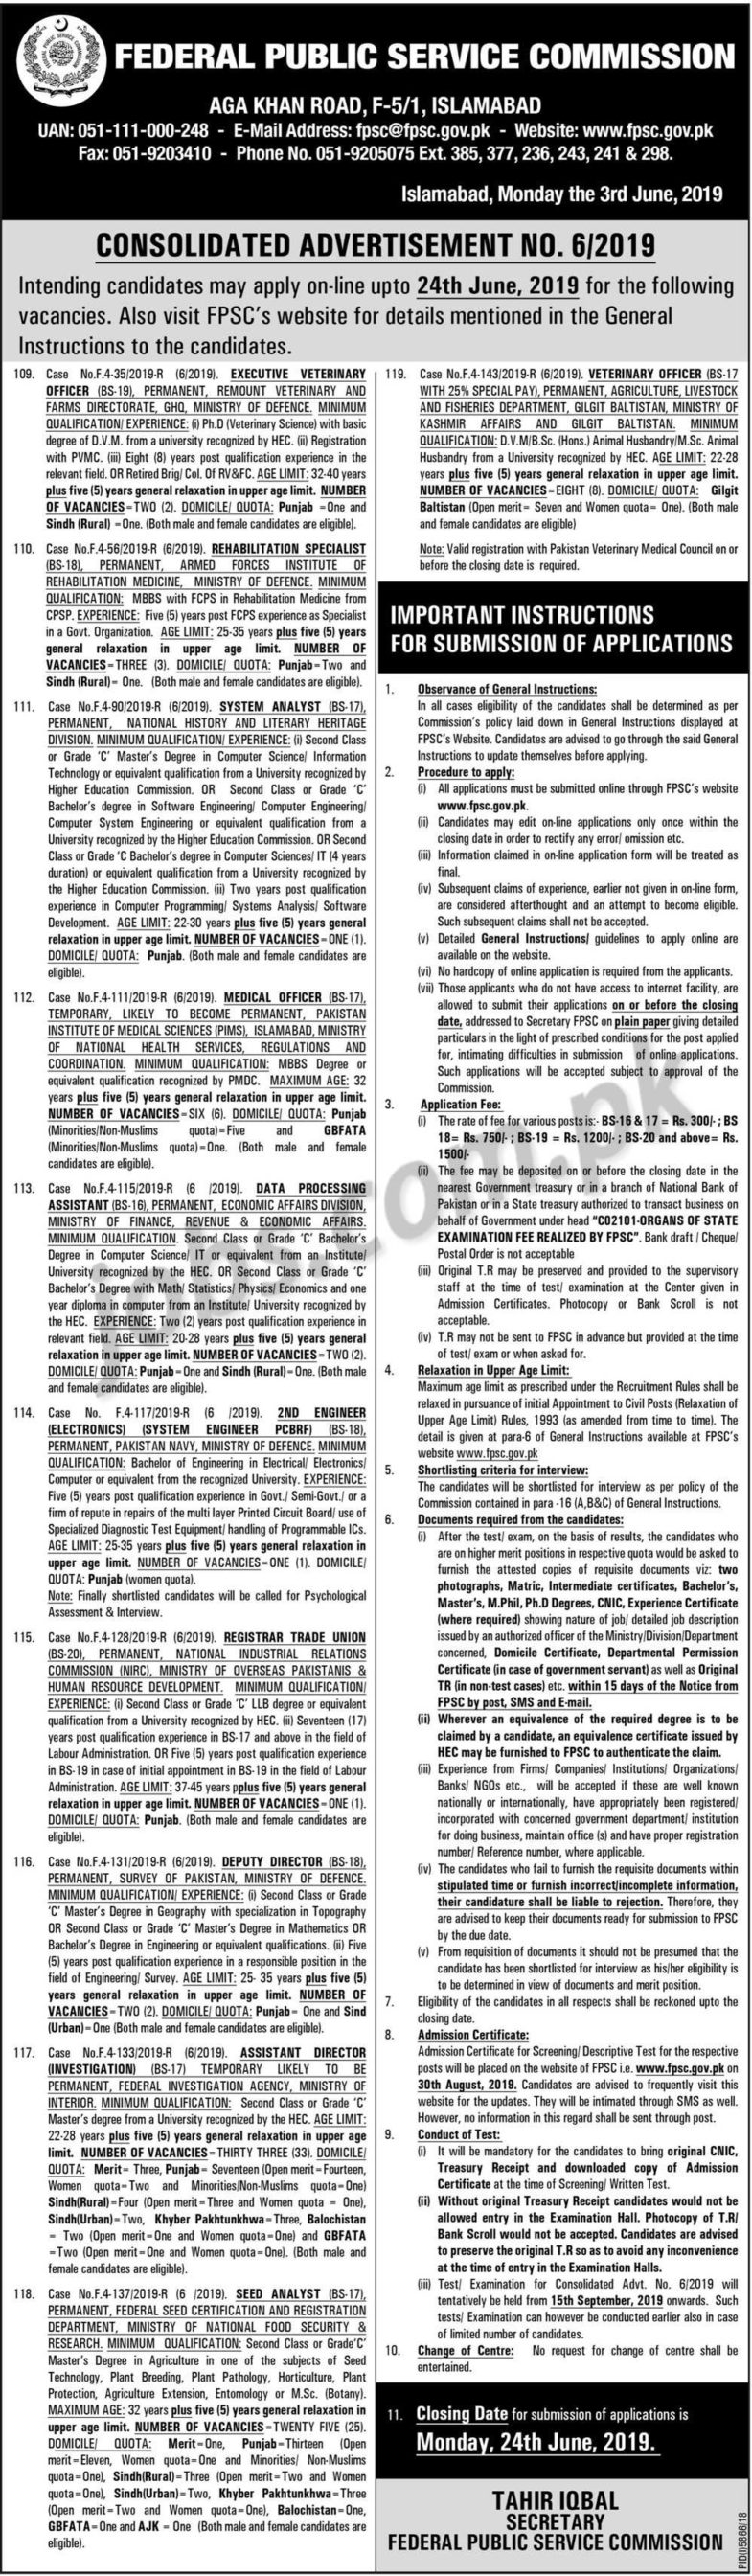 FPSC Jobs (6/2019): 84+ Posts in Federal Public Service Commission June 2019 Latest Notification